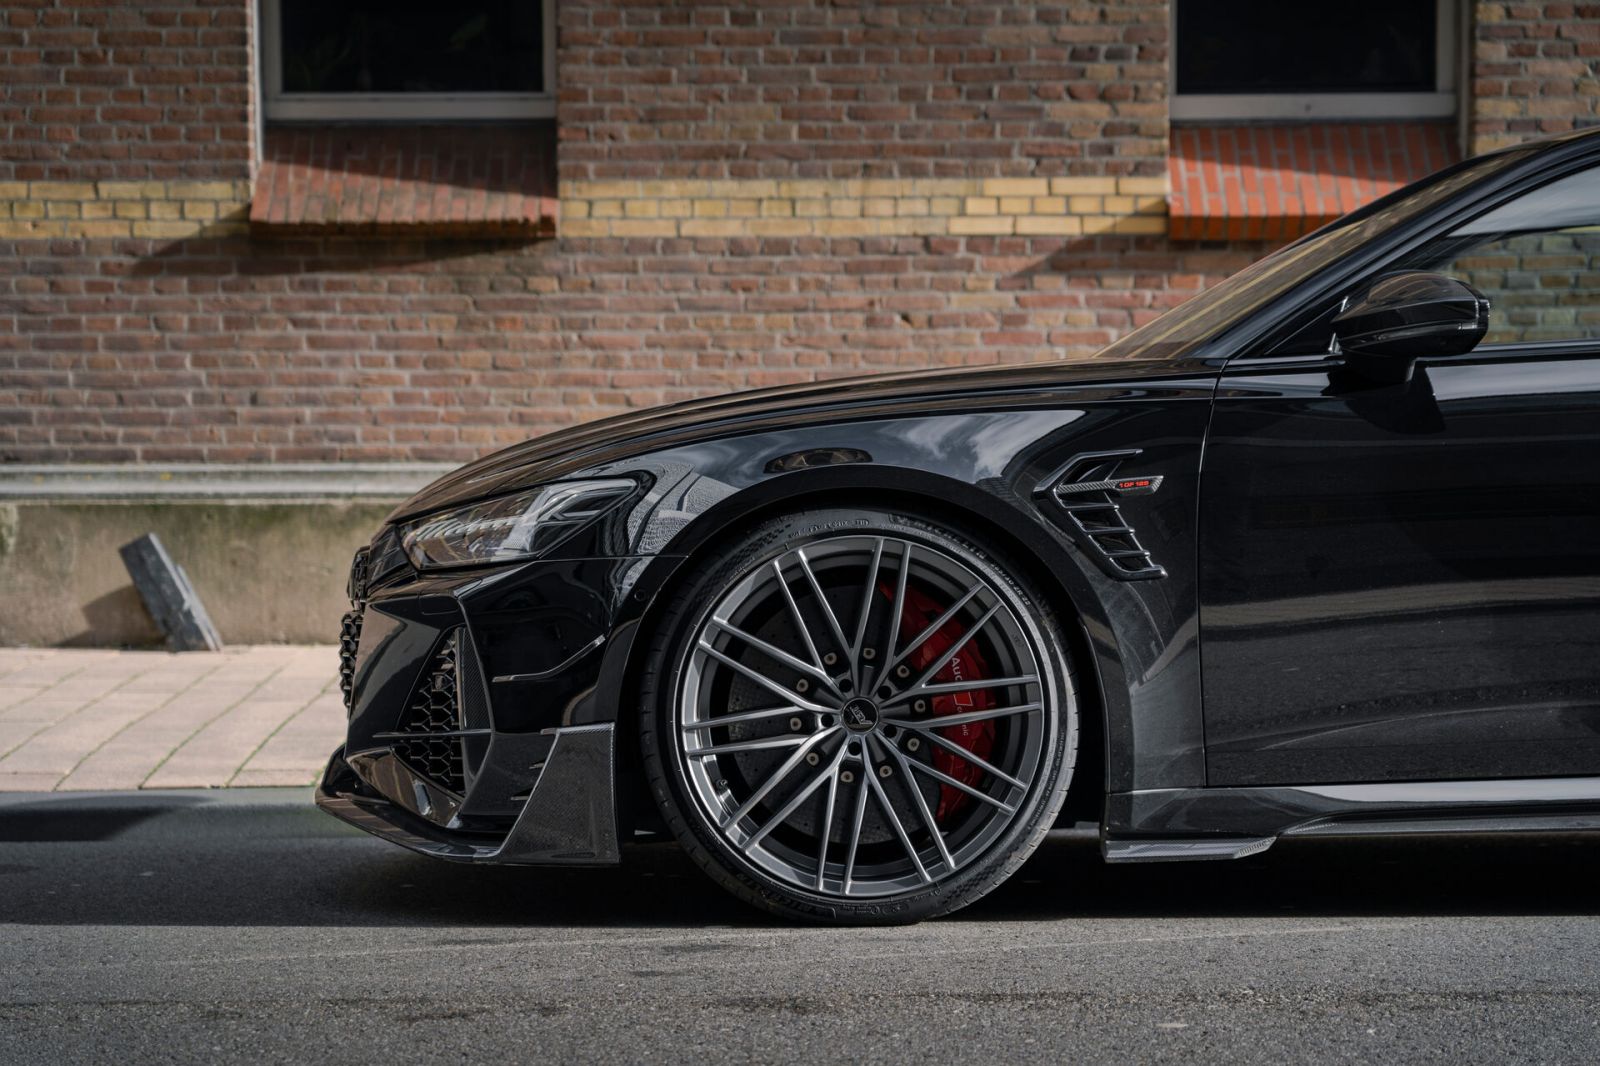 Check our price and buy ABT Body Kit for Audi RS6-R C8